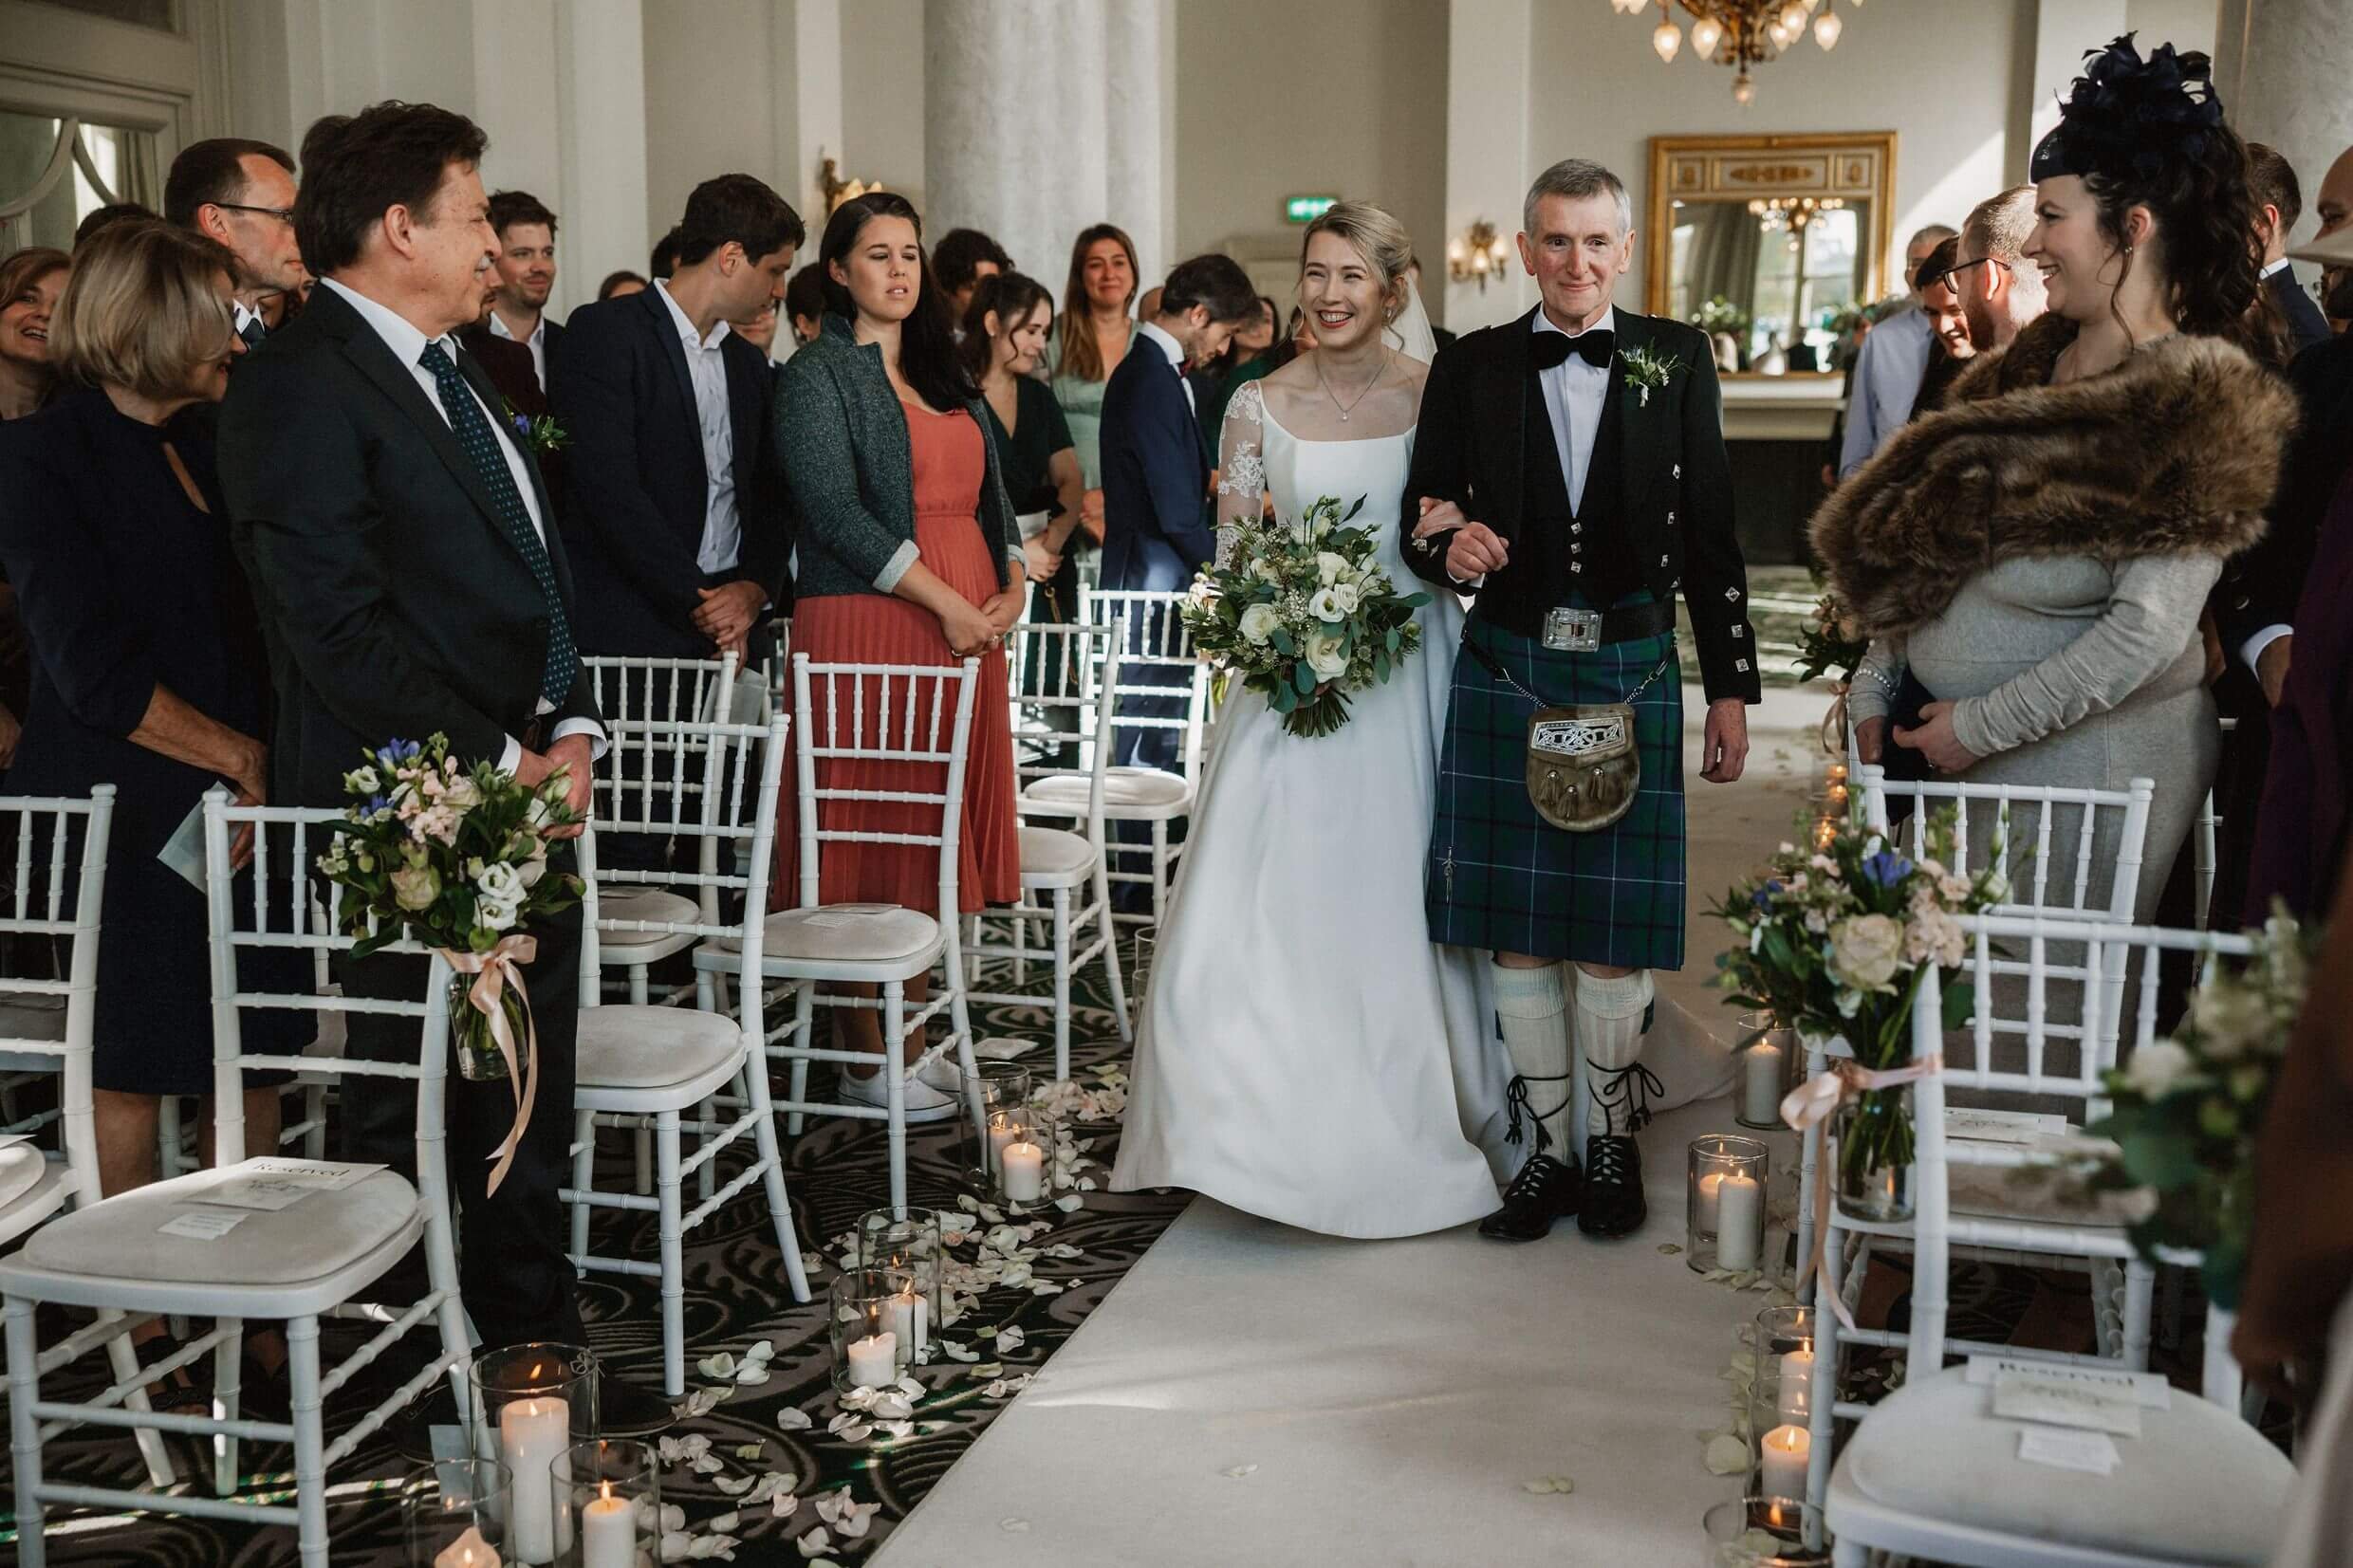 the bride and father of the bride walk up the aisle as guests look on during balmoral hotel edinburgh wedding ceremony in scotland